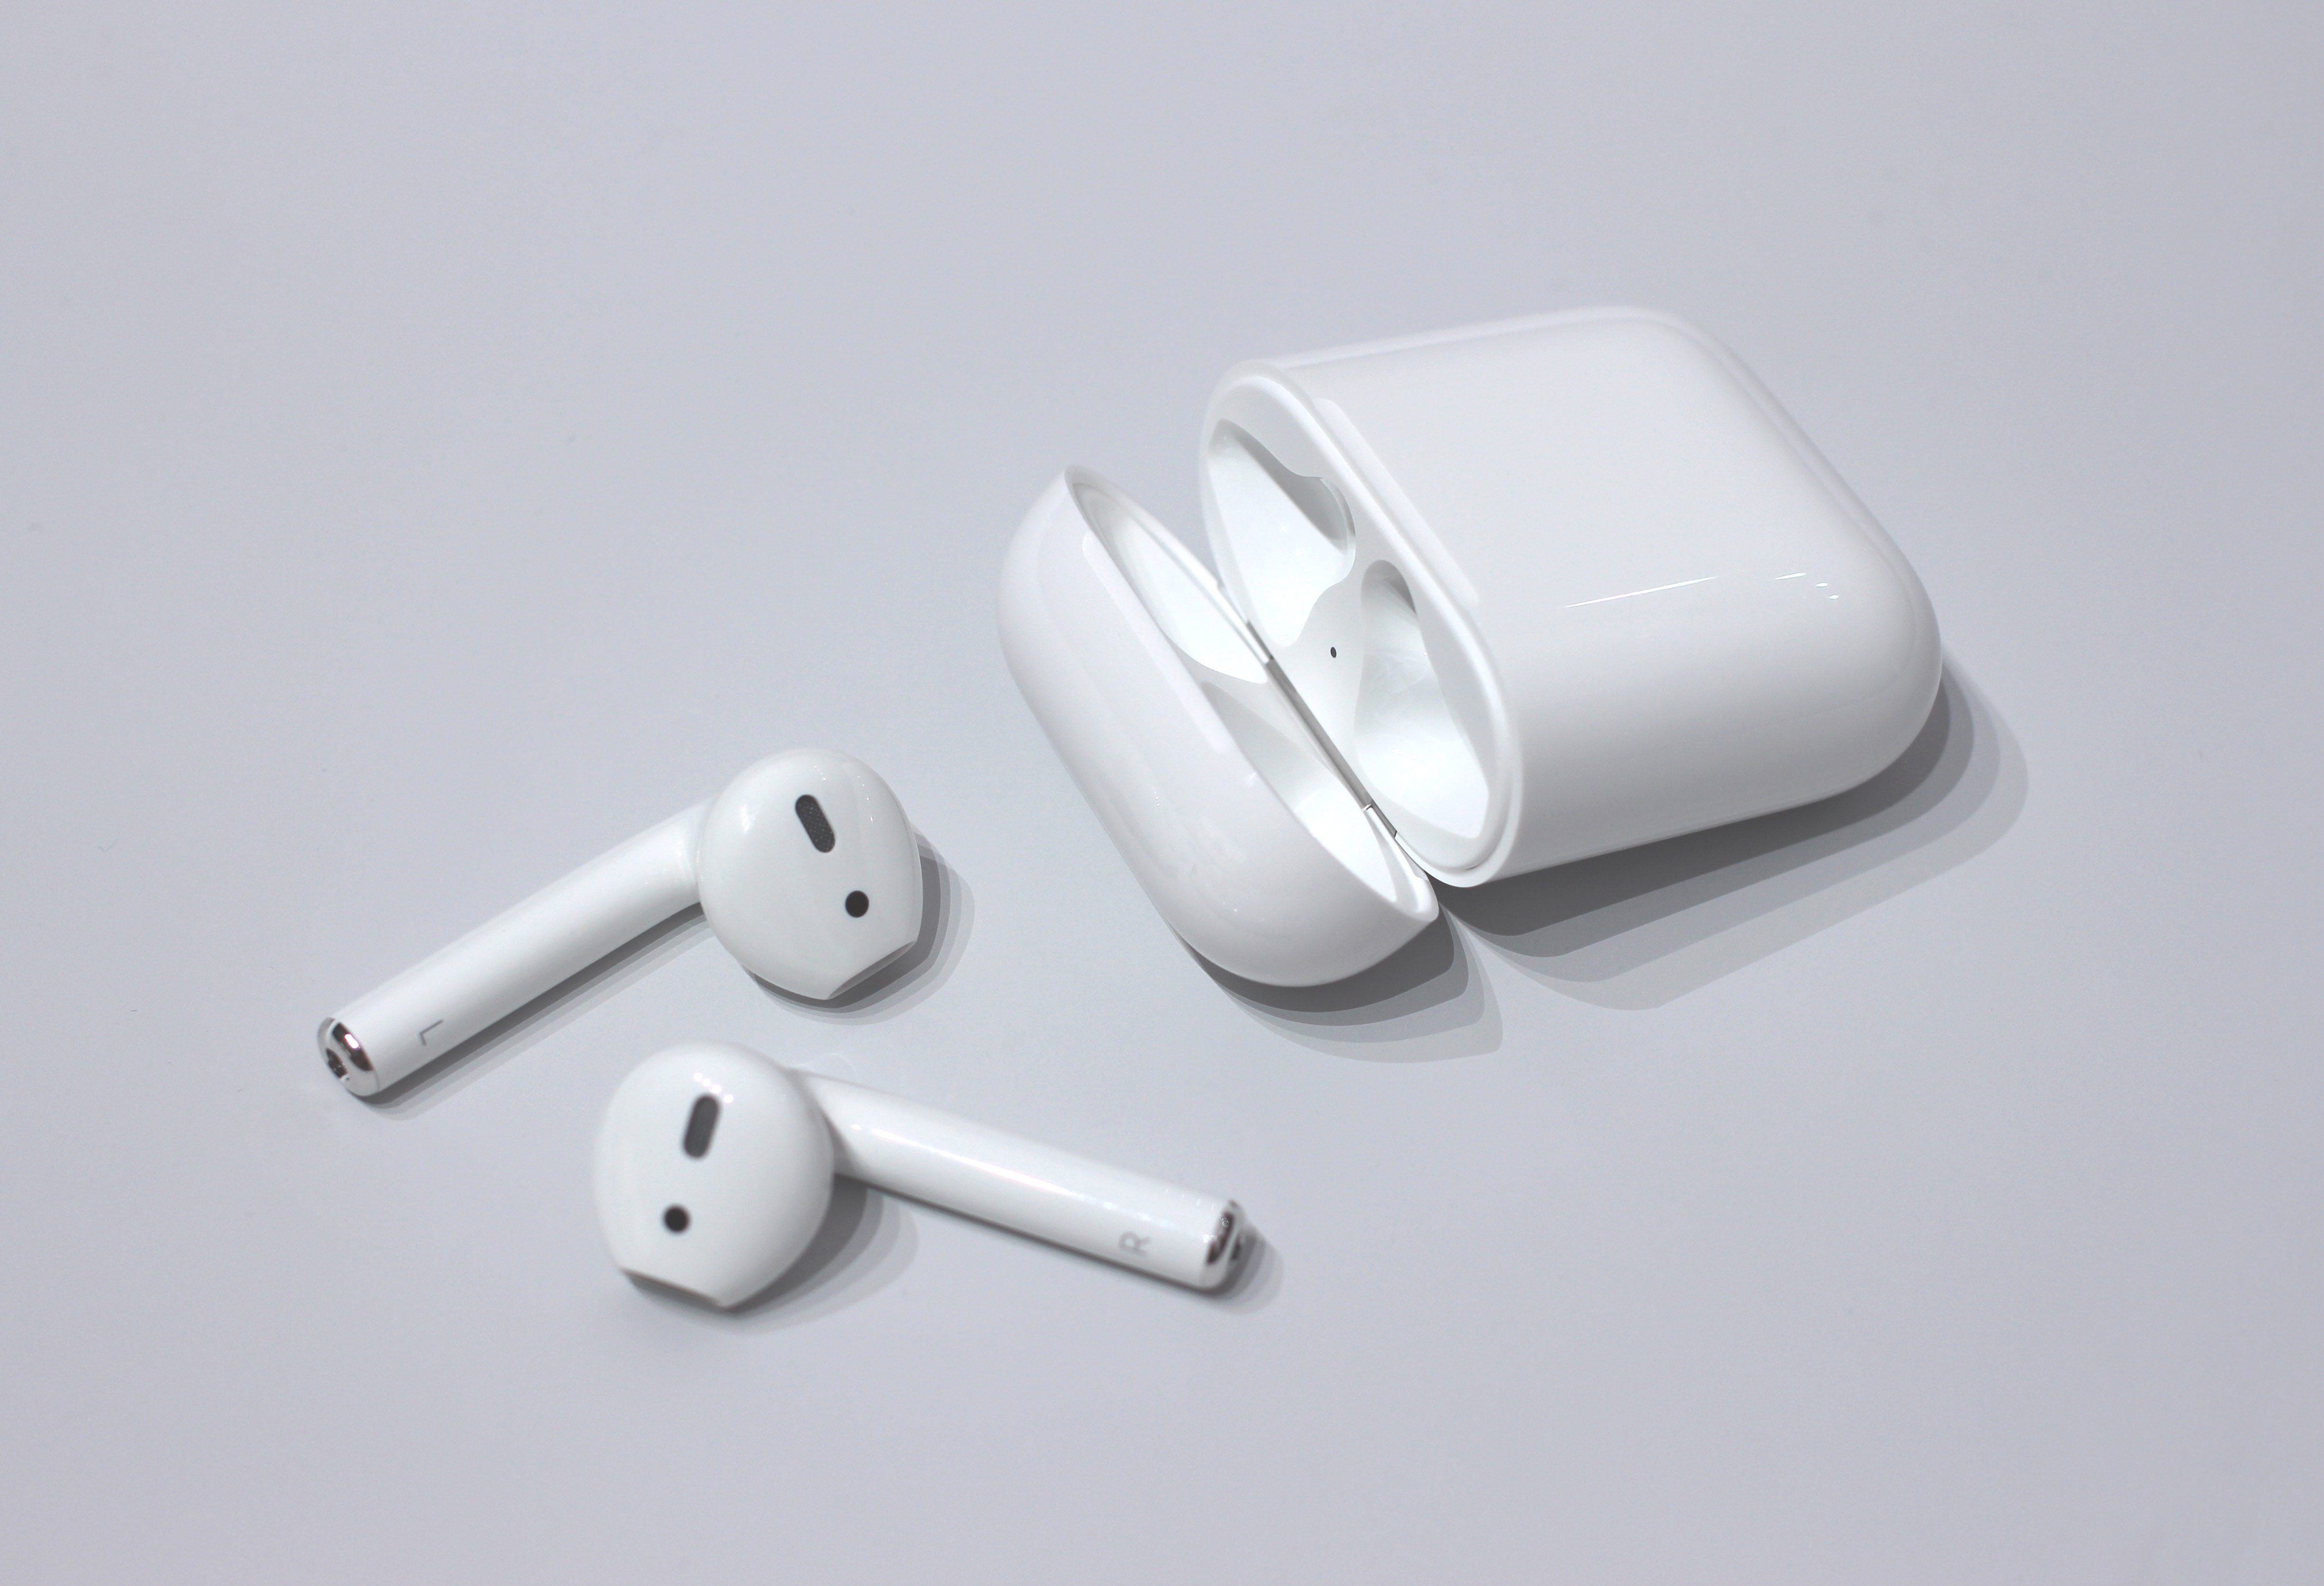 Foresight Clean the bedroom worm AirPods - Wikipedia